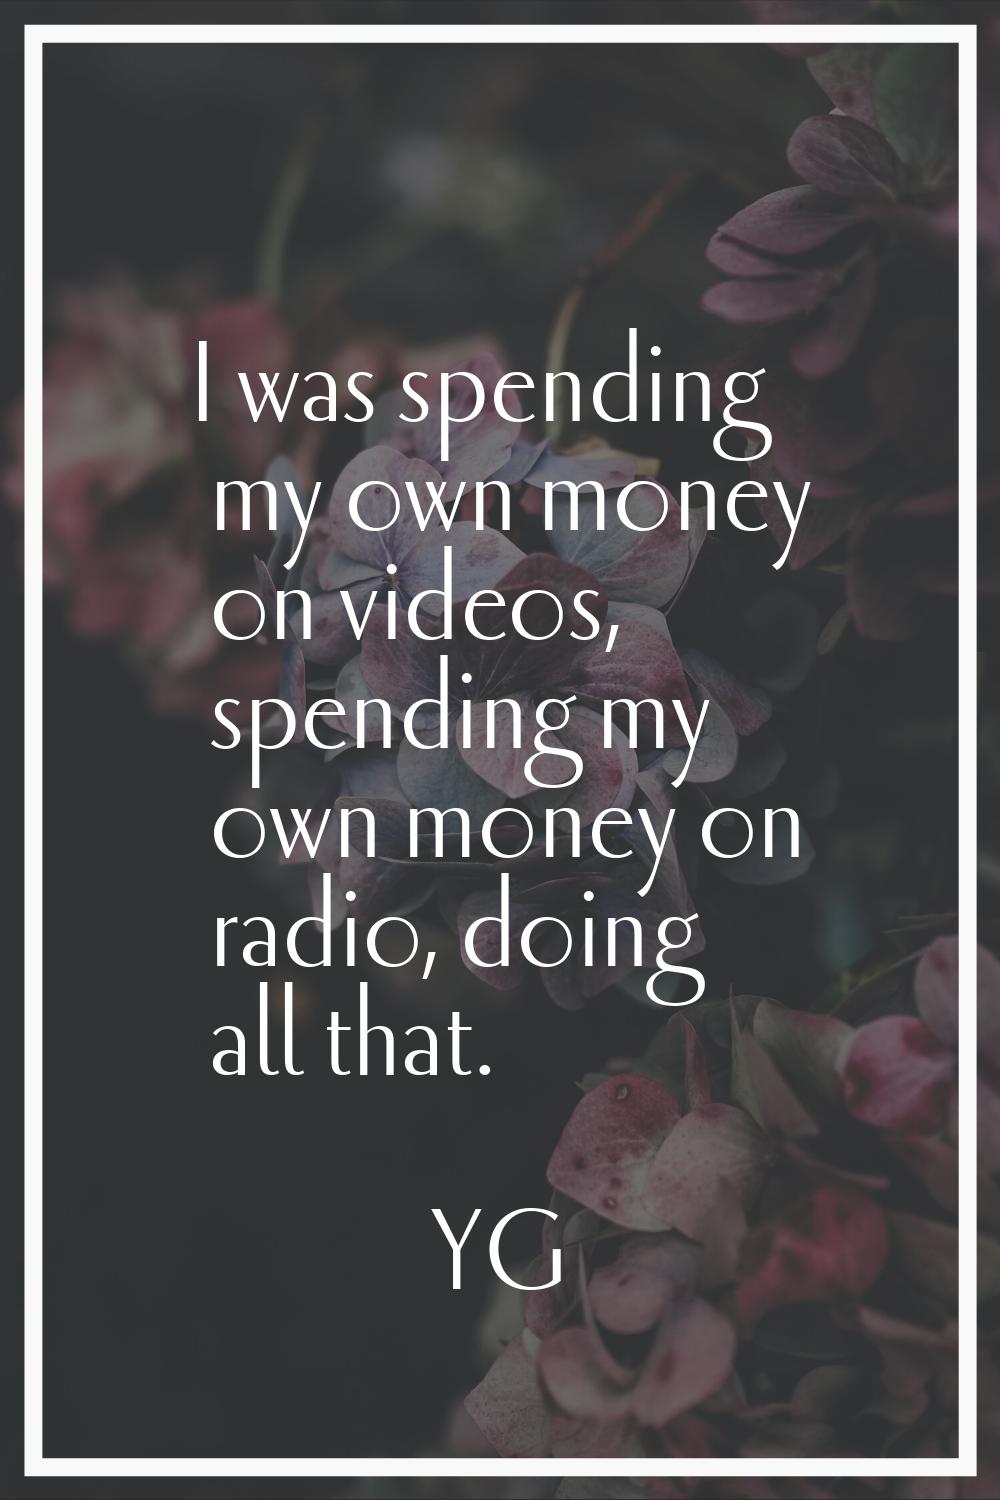 I was spending my own money on videos, spending my own money on radio, doing all that.